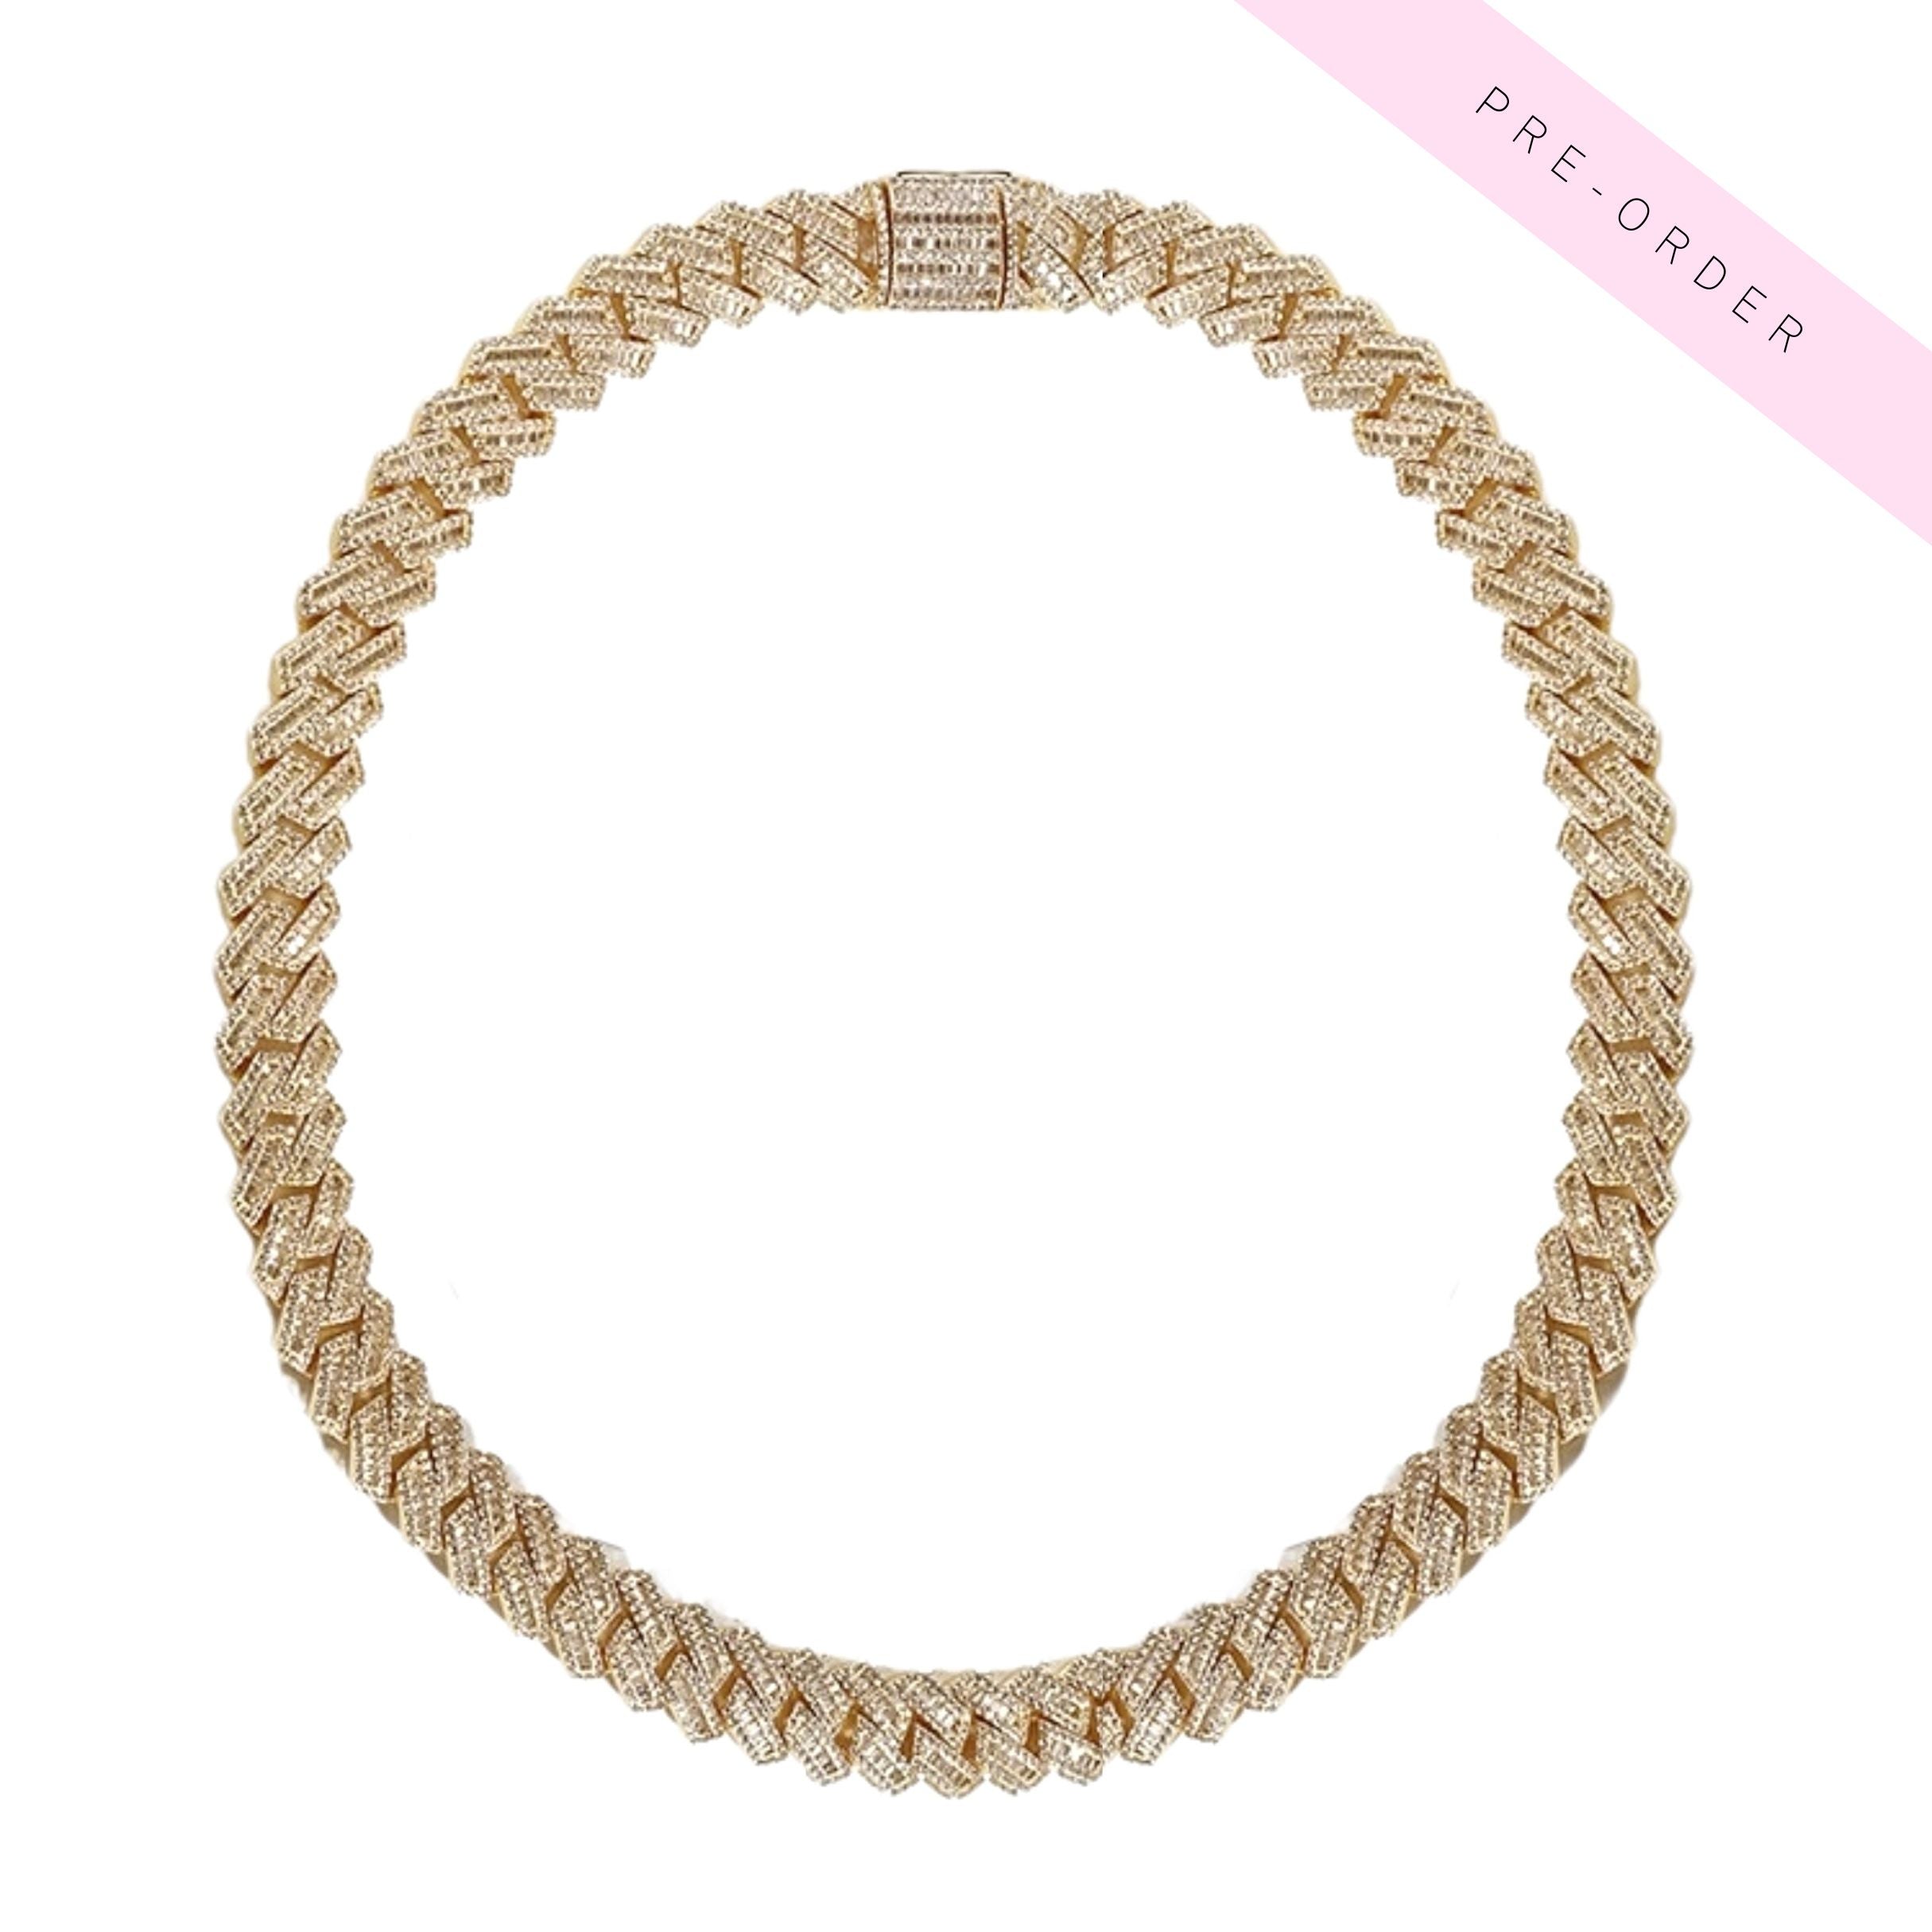 TOKYO NECKLACE - GOLD